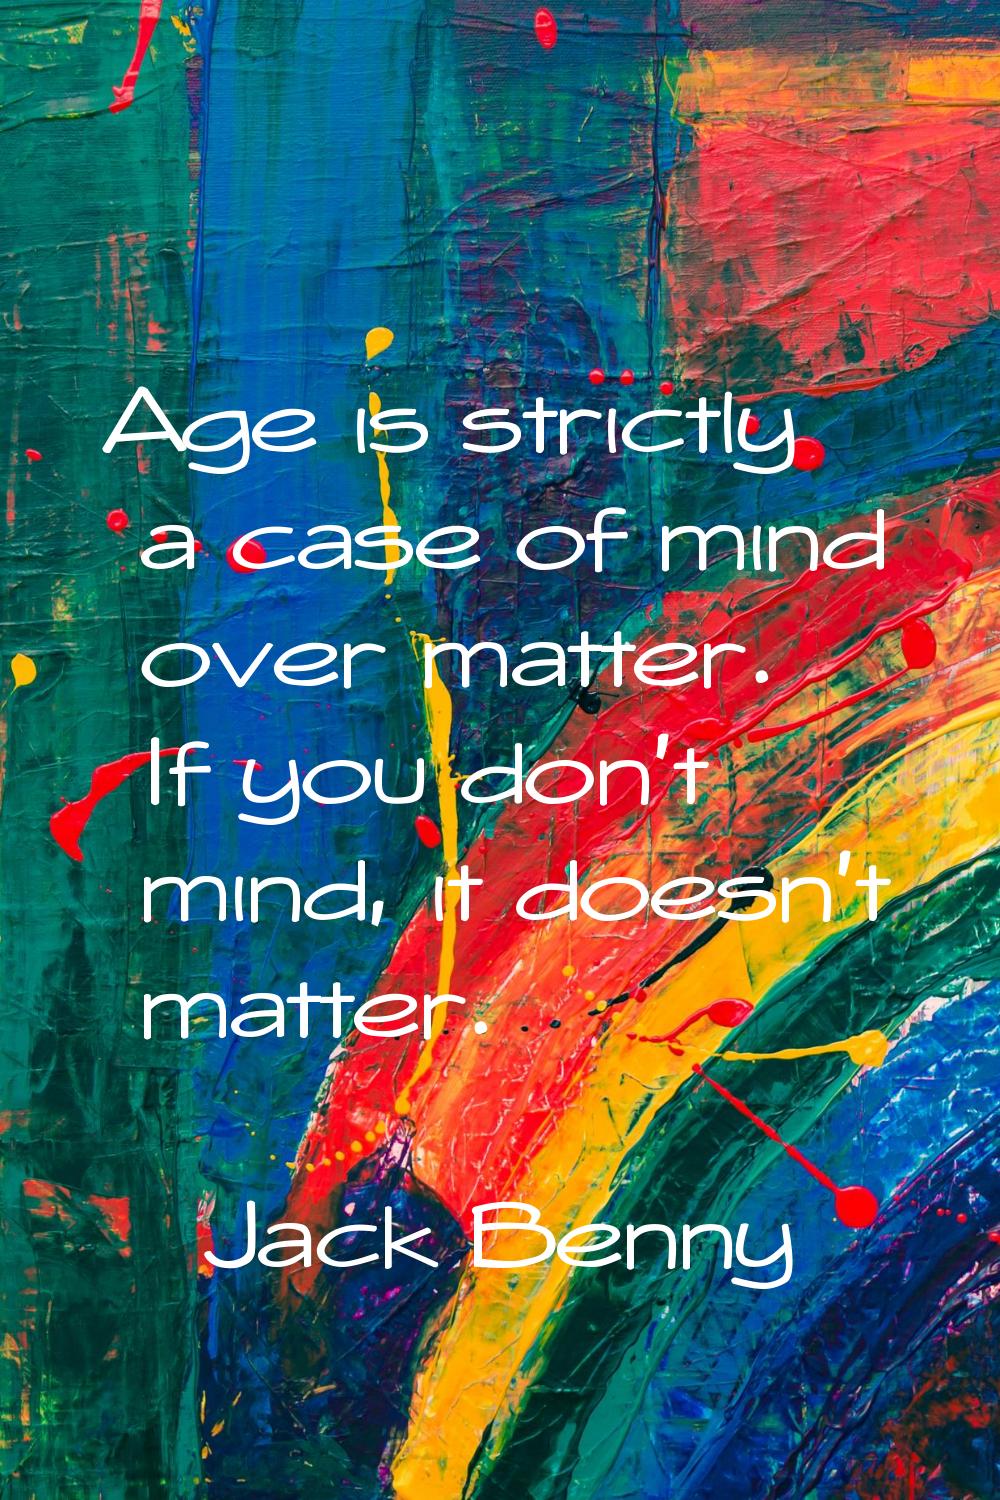 Age is strictly a case of mind over matter. If you don't mind, it doesn't matter.